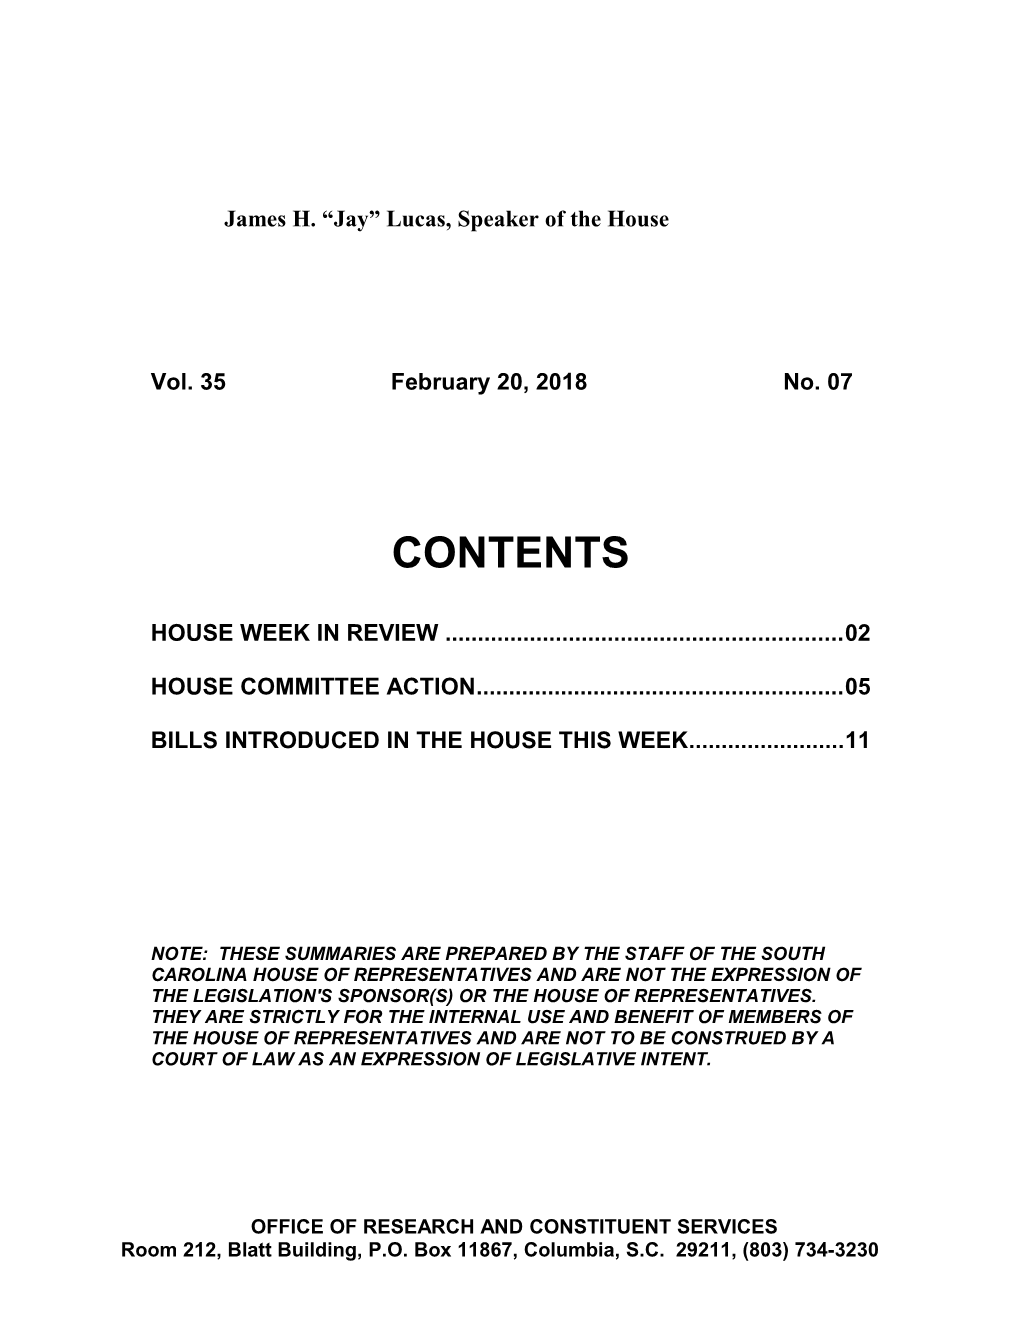 Bills Introduced in the House This Week 11